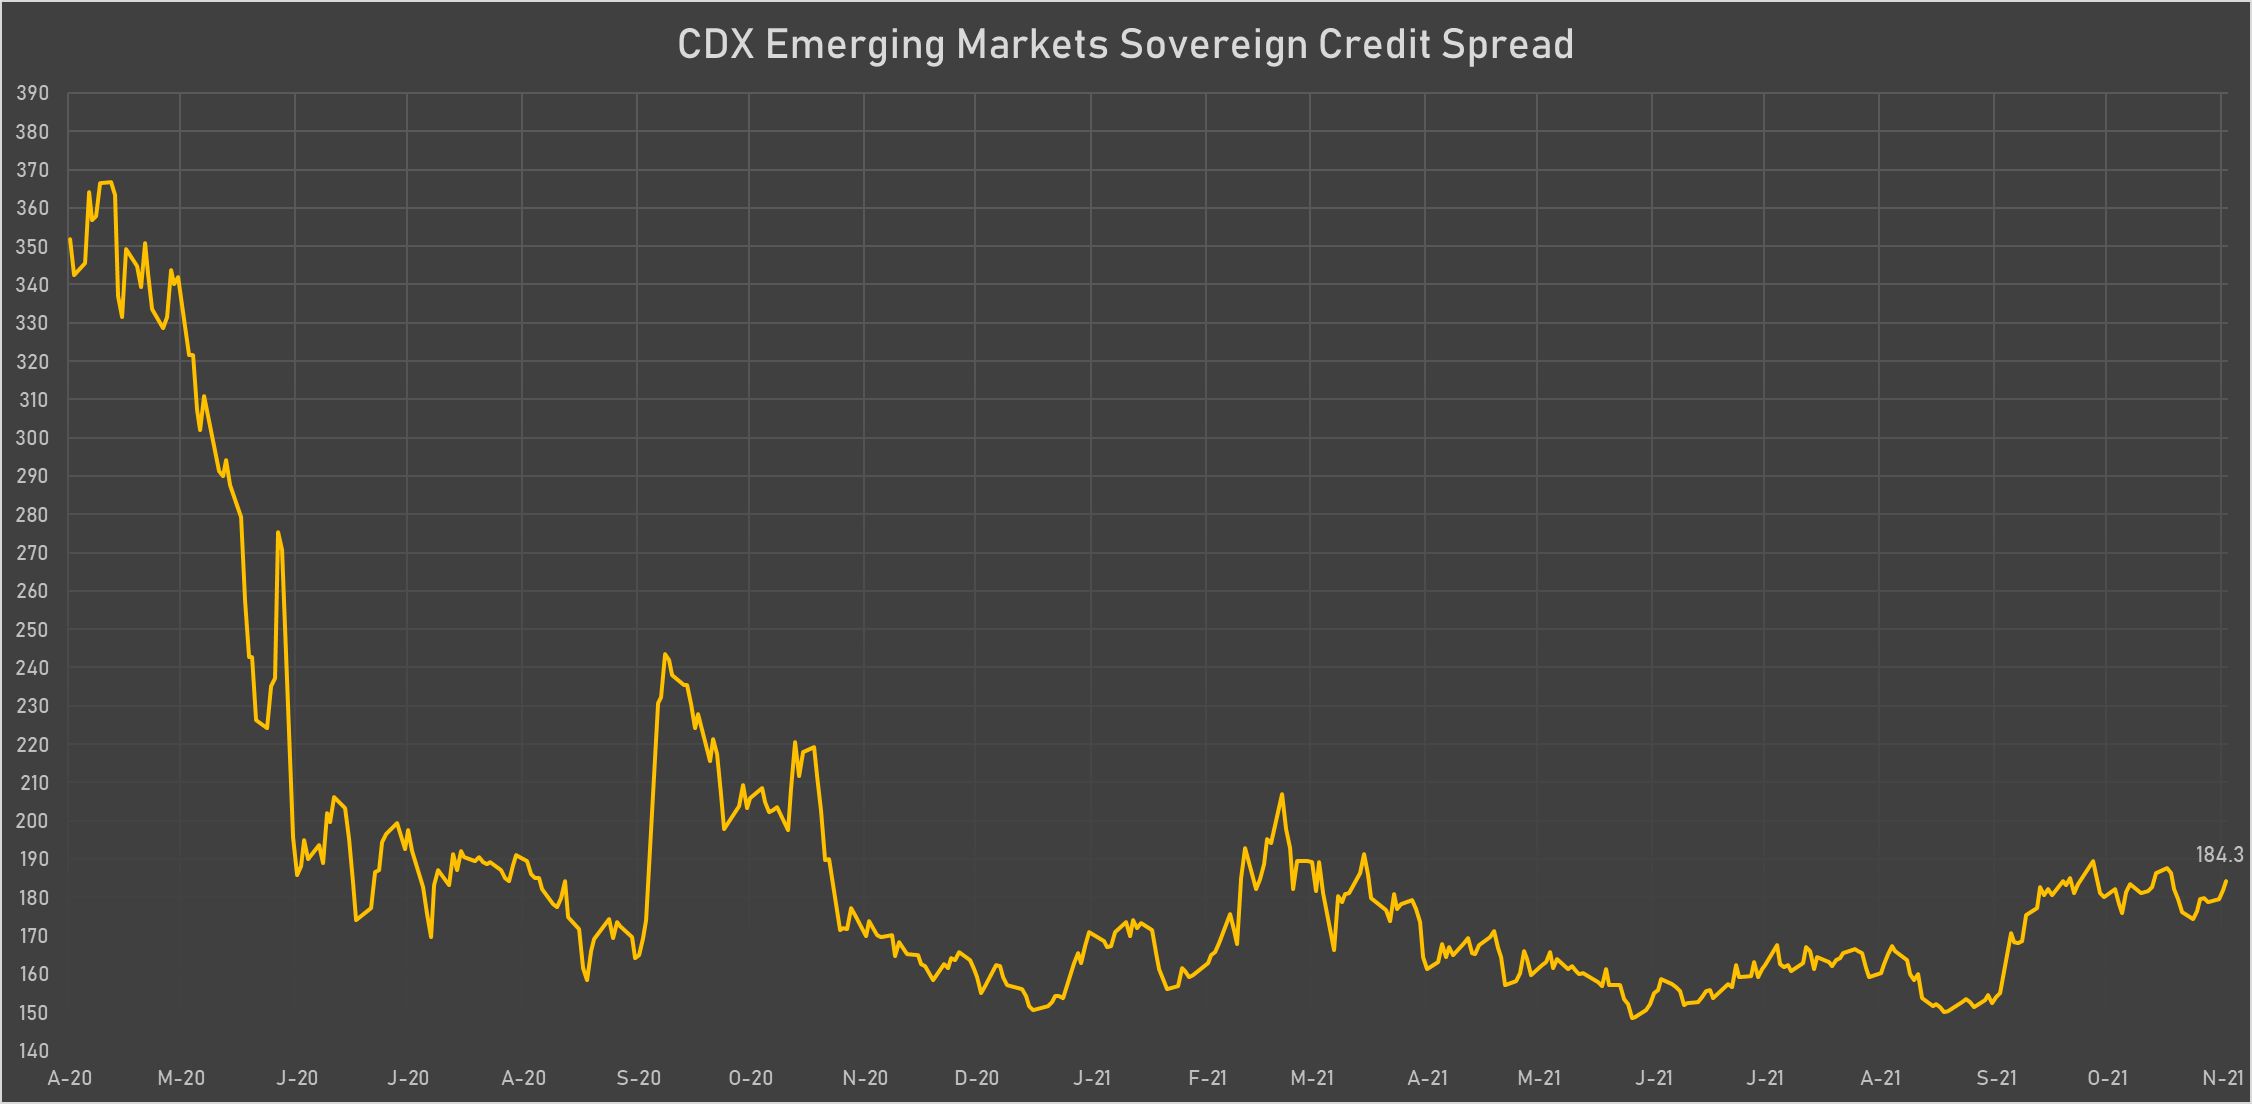 CDX Sovereign Credit Spread | Sources: phipost.com, Refinitiv data